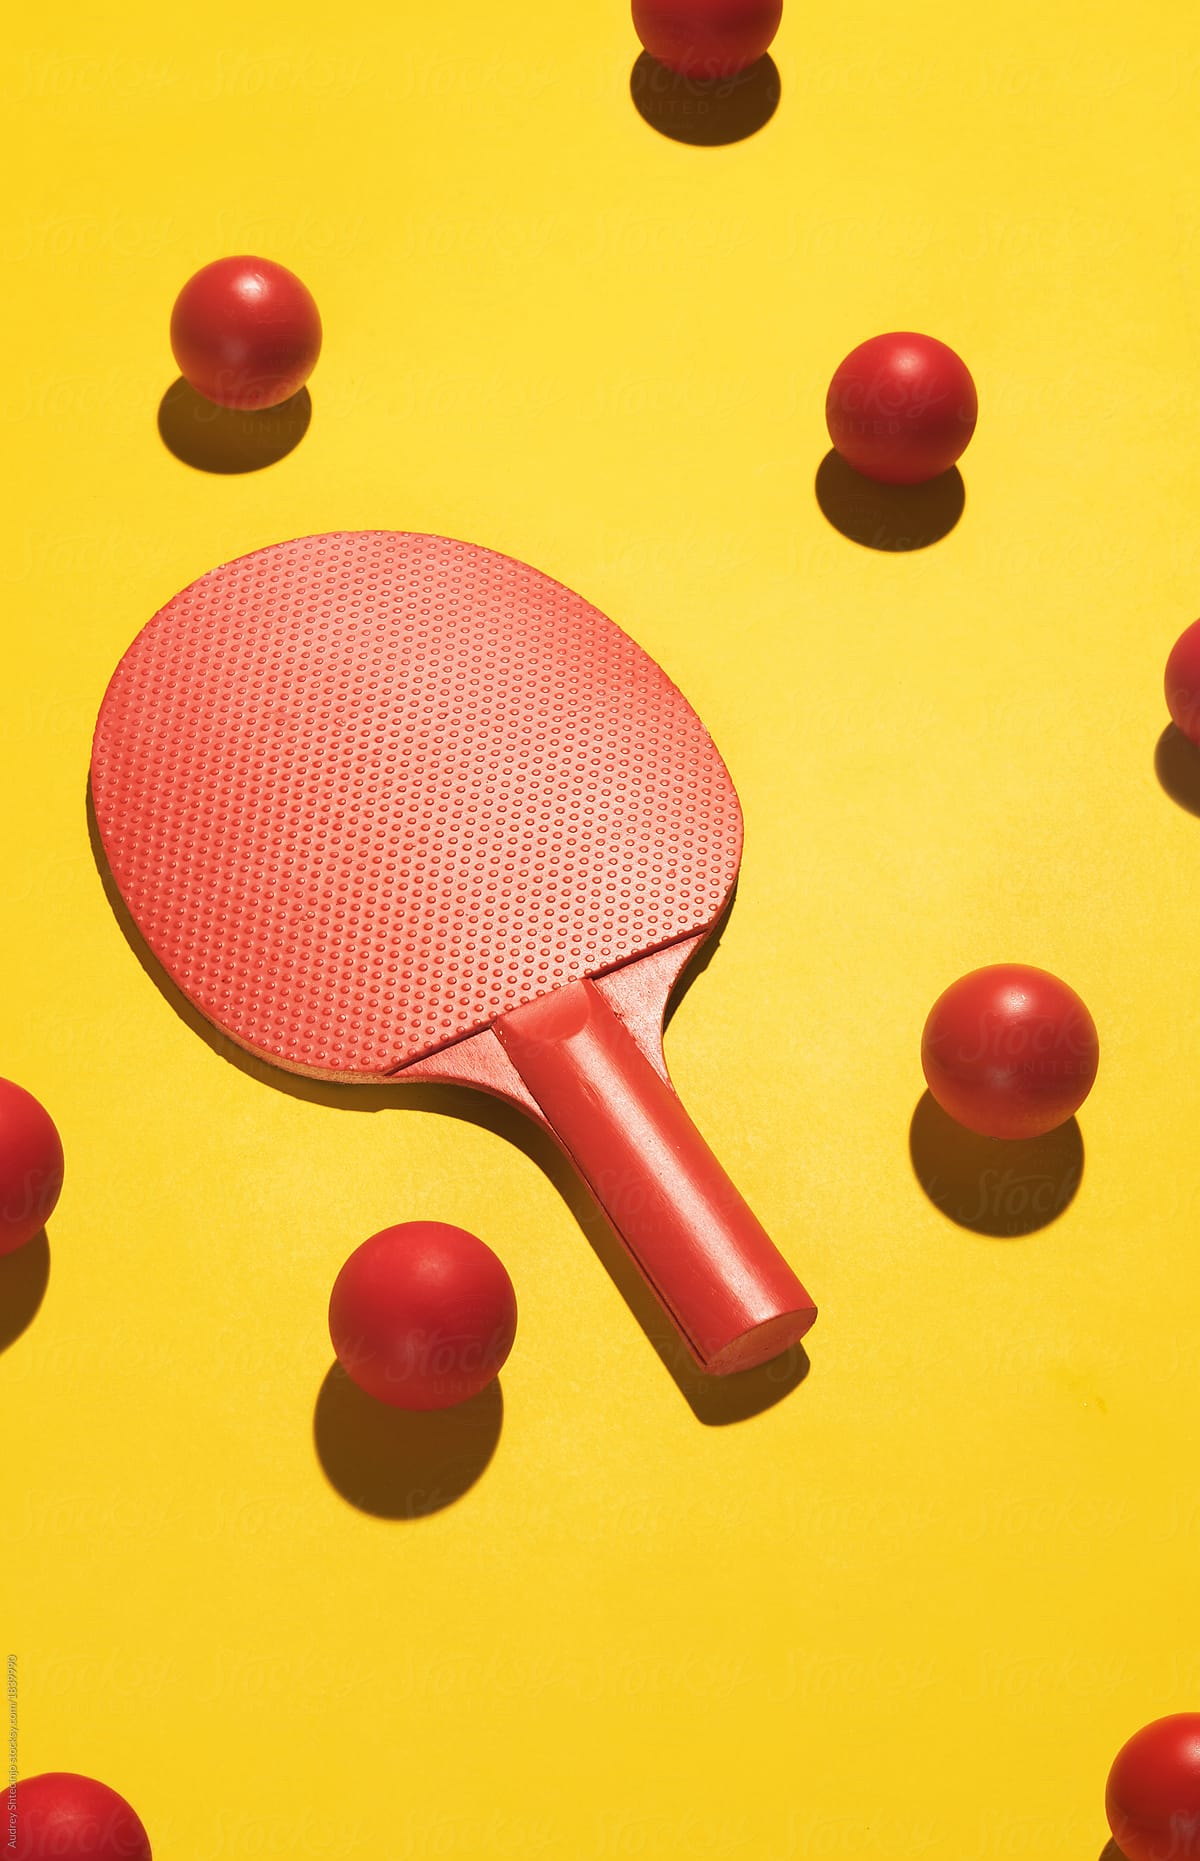 Ping Pong Racket With Balls.